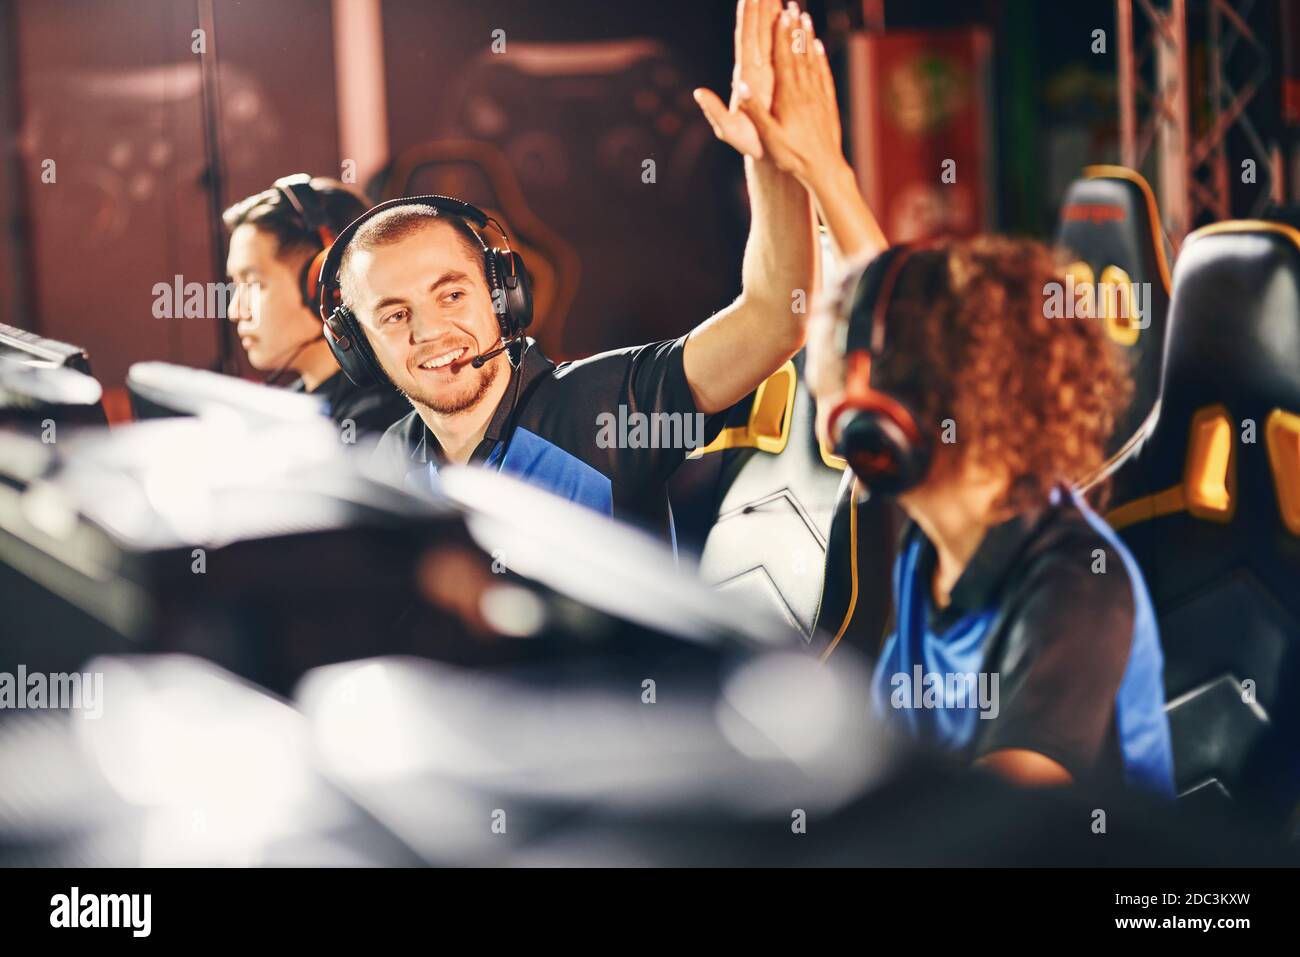 Happy Person Live Streaming Video Games Tournament Online Multiple Players  Stock Photo by ©DragosCondreaW 586957474